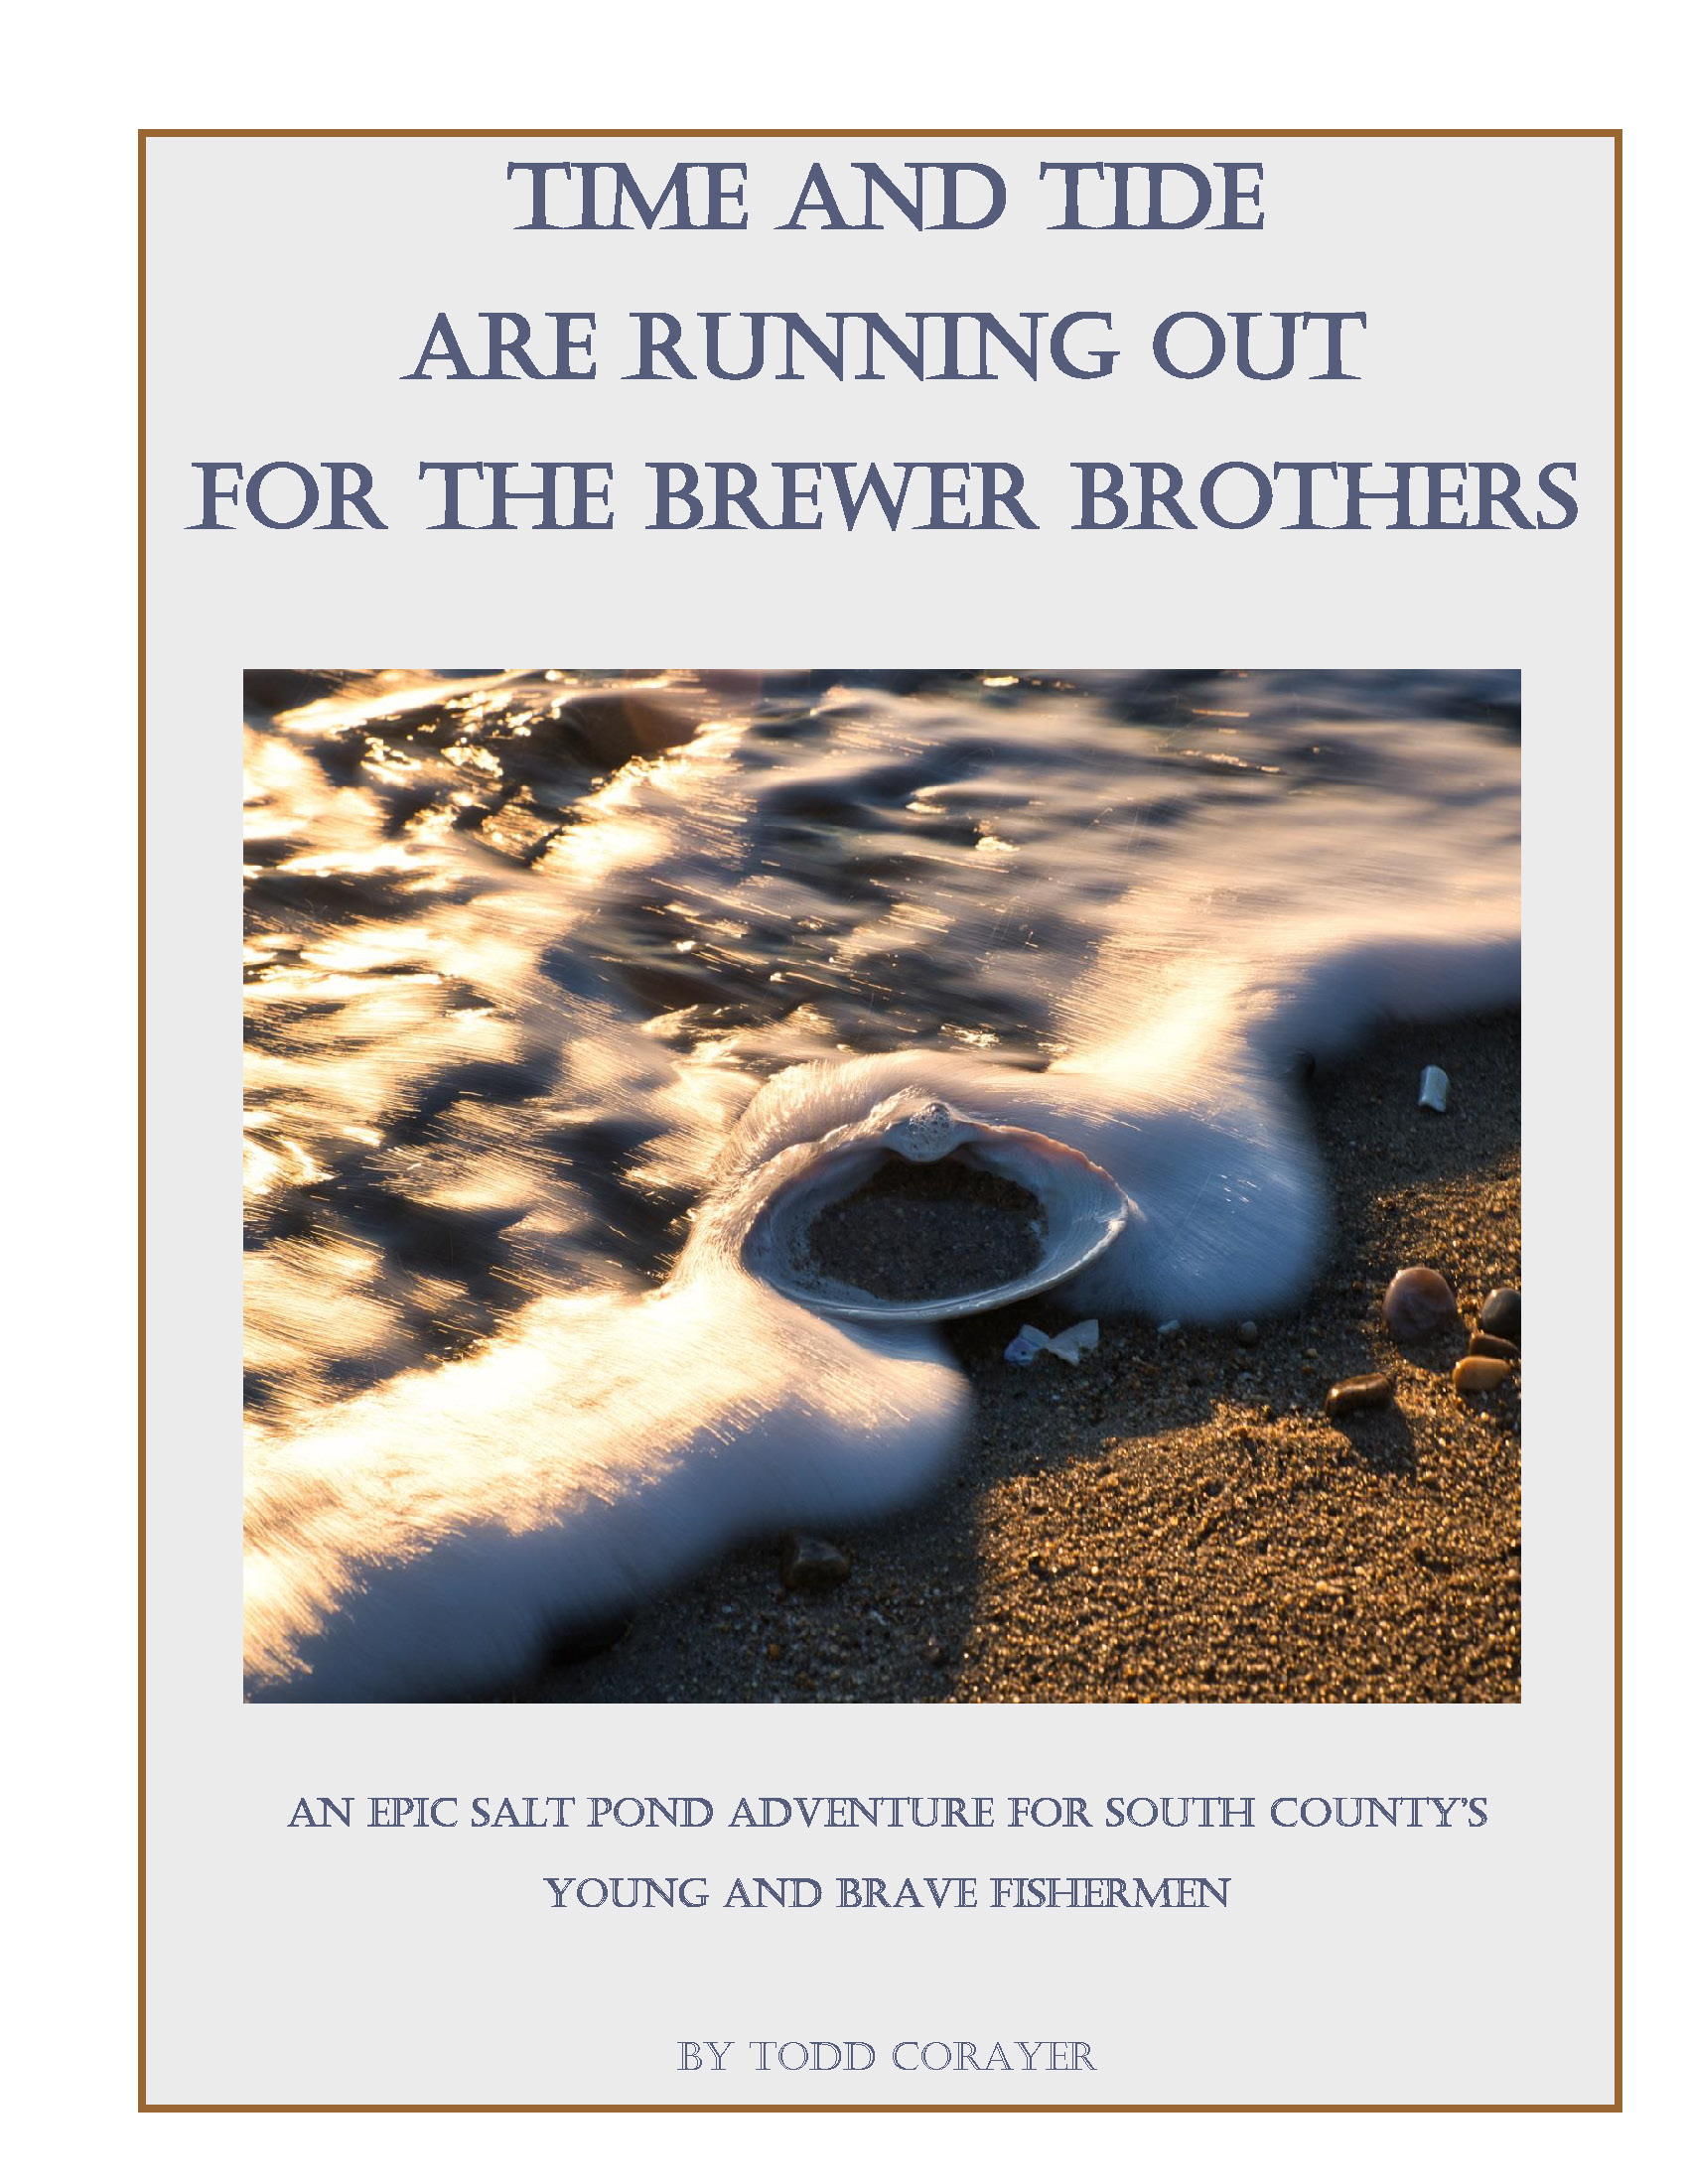 The Brewer Brothers Part II